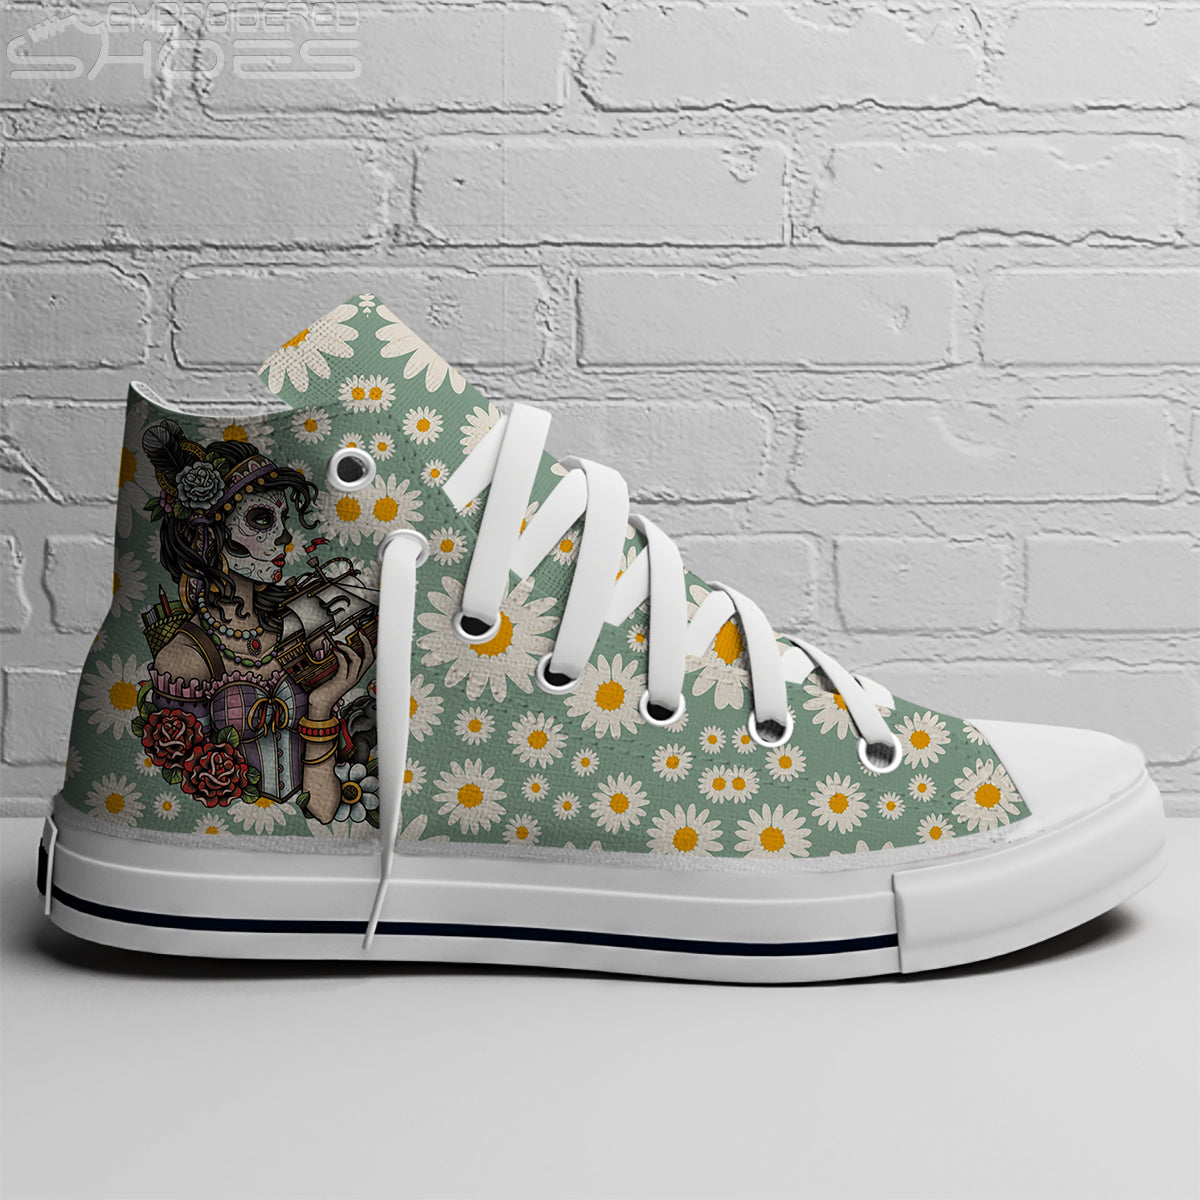 EShoes Personalized Women's Canvas Shoes, Tattoo Girl With Boat Shoes, Custom Name Shoes.